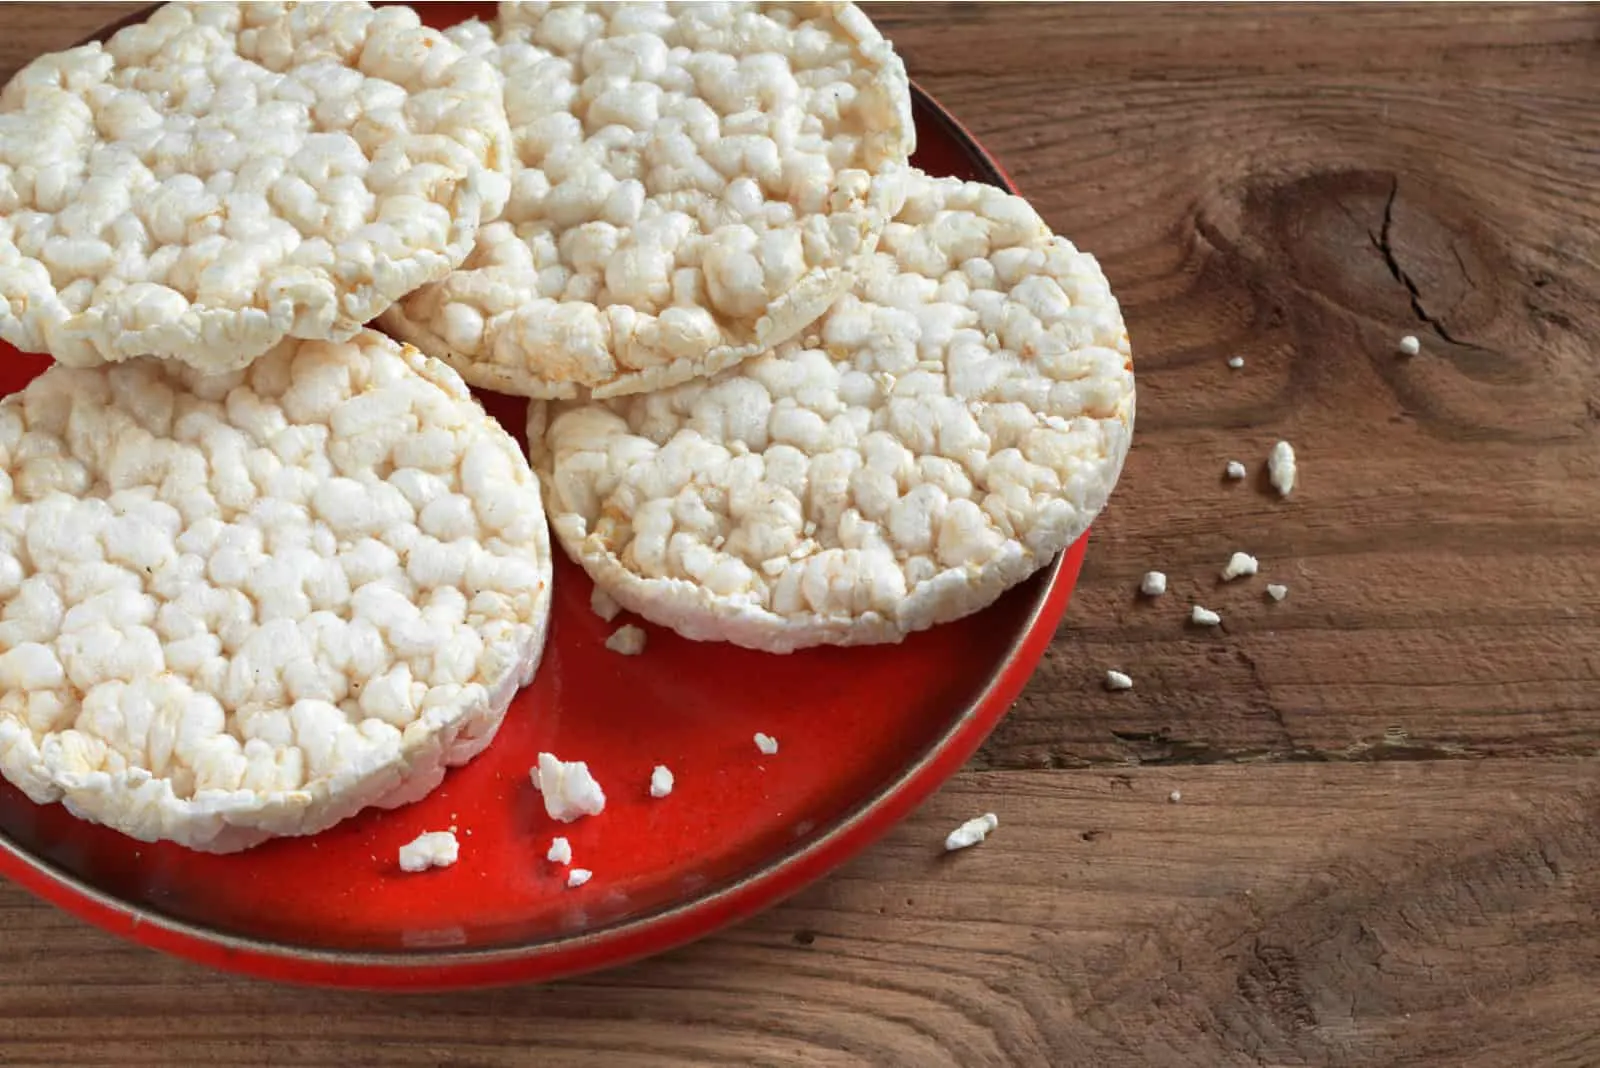 rice cakes in red plate on wooden background